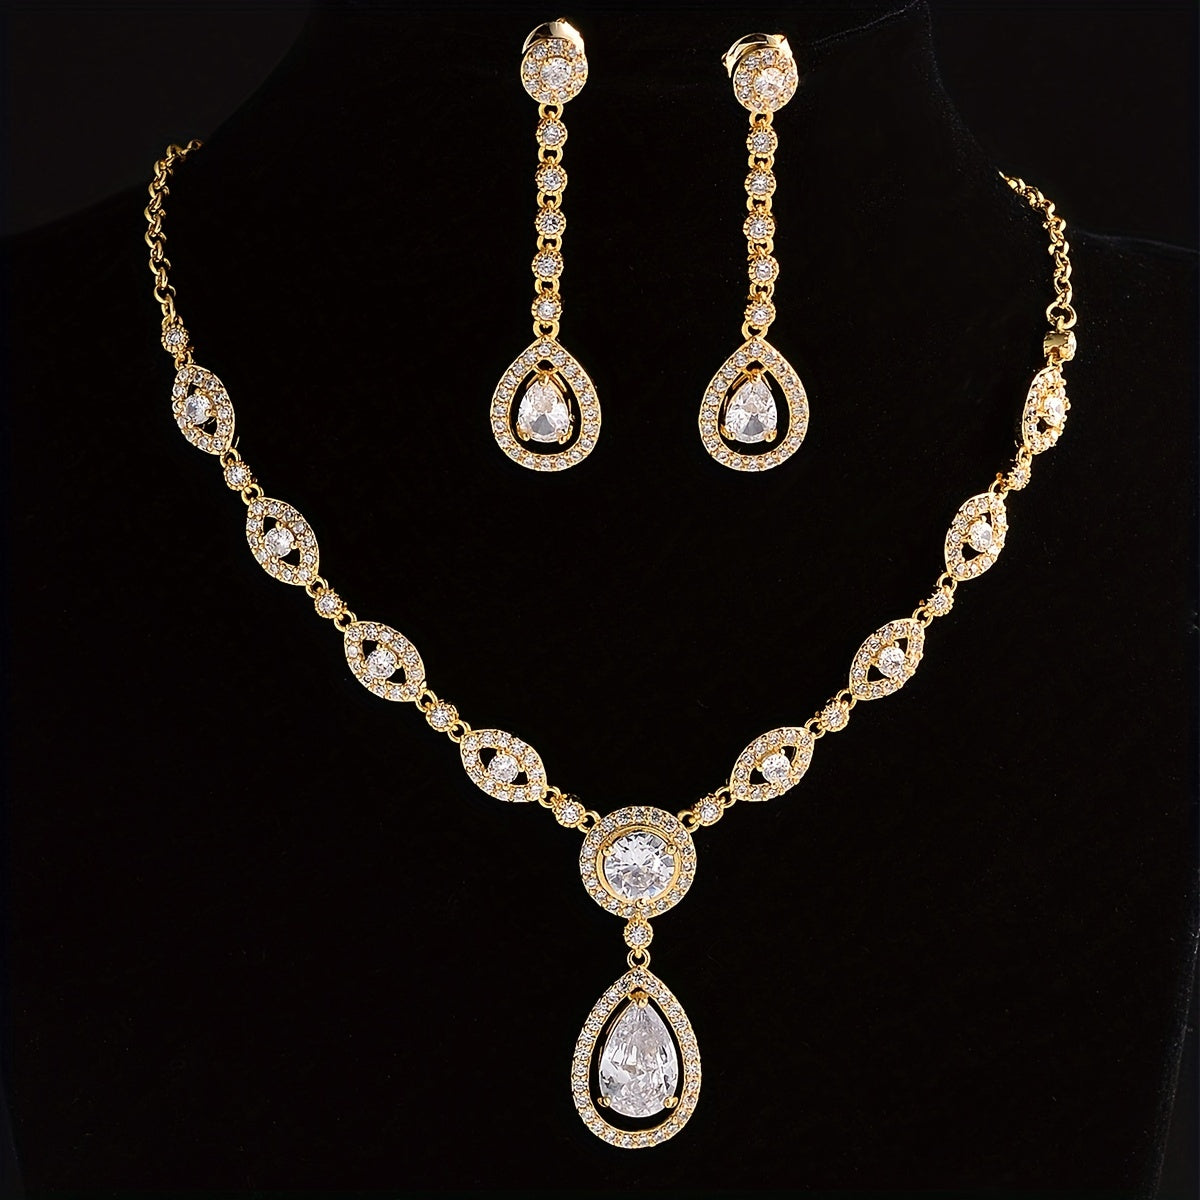 Elegant Water Drop Zircon Jewelry Set - 18K Gold Plated Earrings and Necklace for Women and Girls